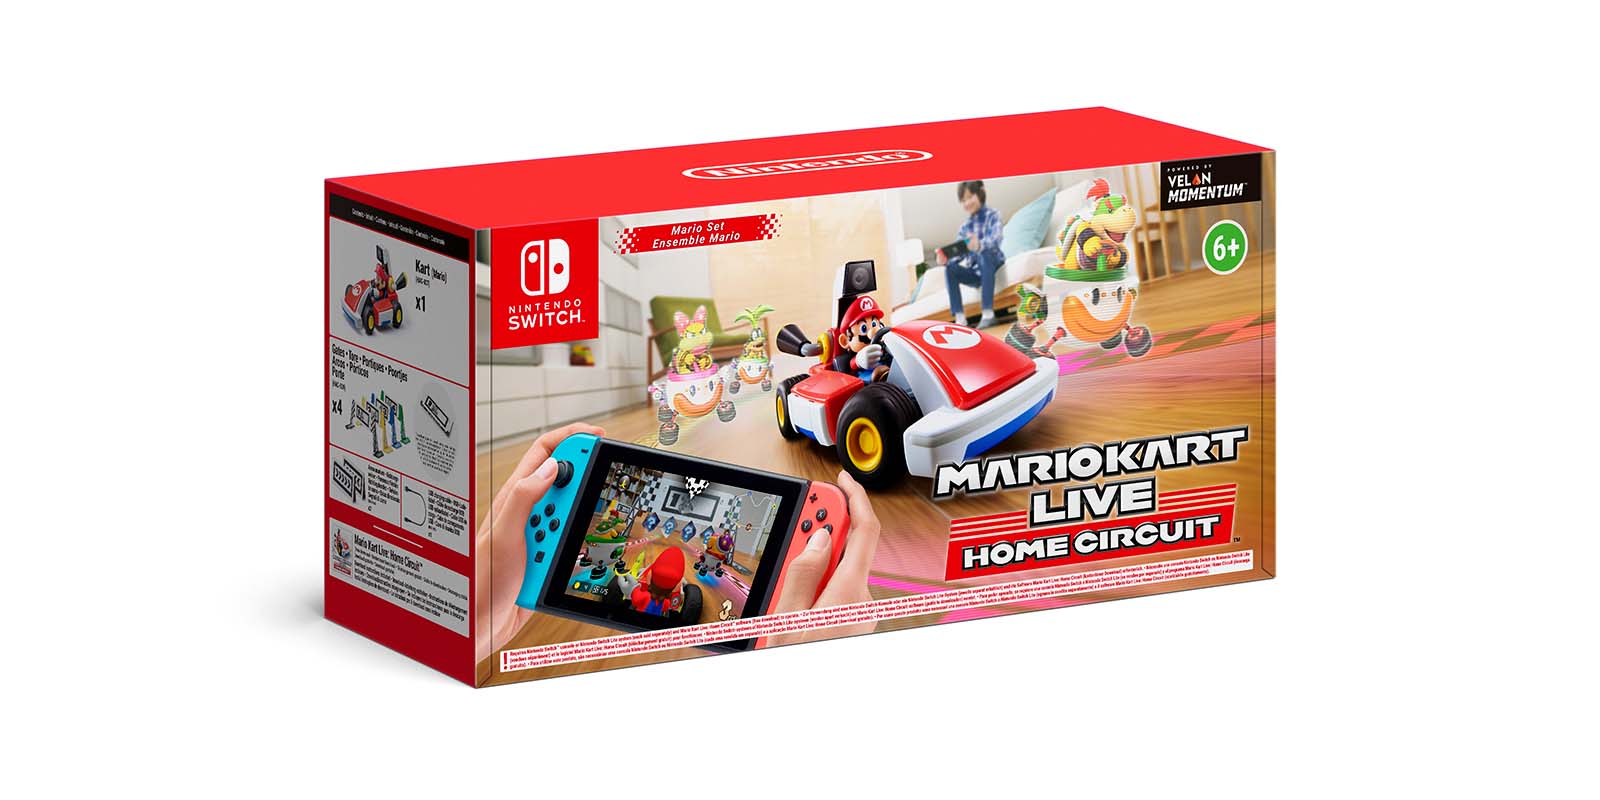 NERD Provides Expertise and Several Key Software Technologies Fueling Mario Kart Live: Home Circuit